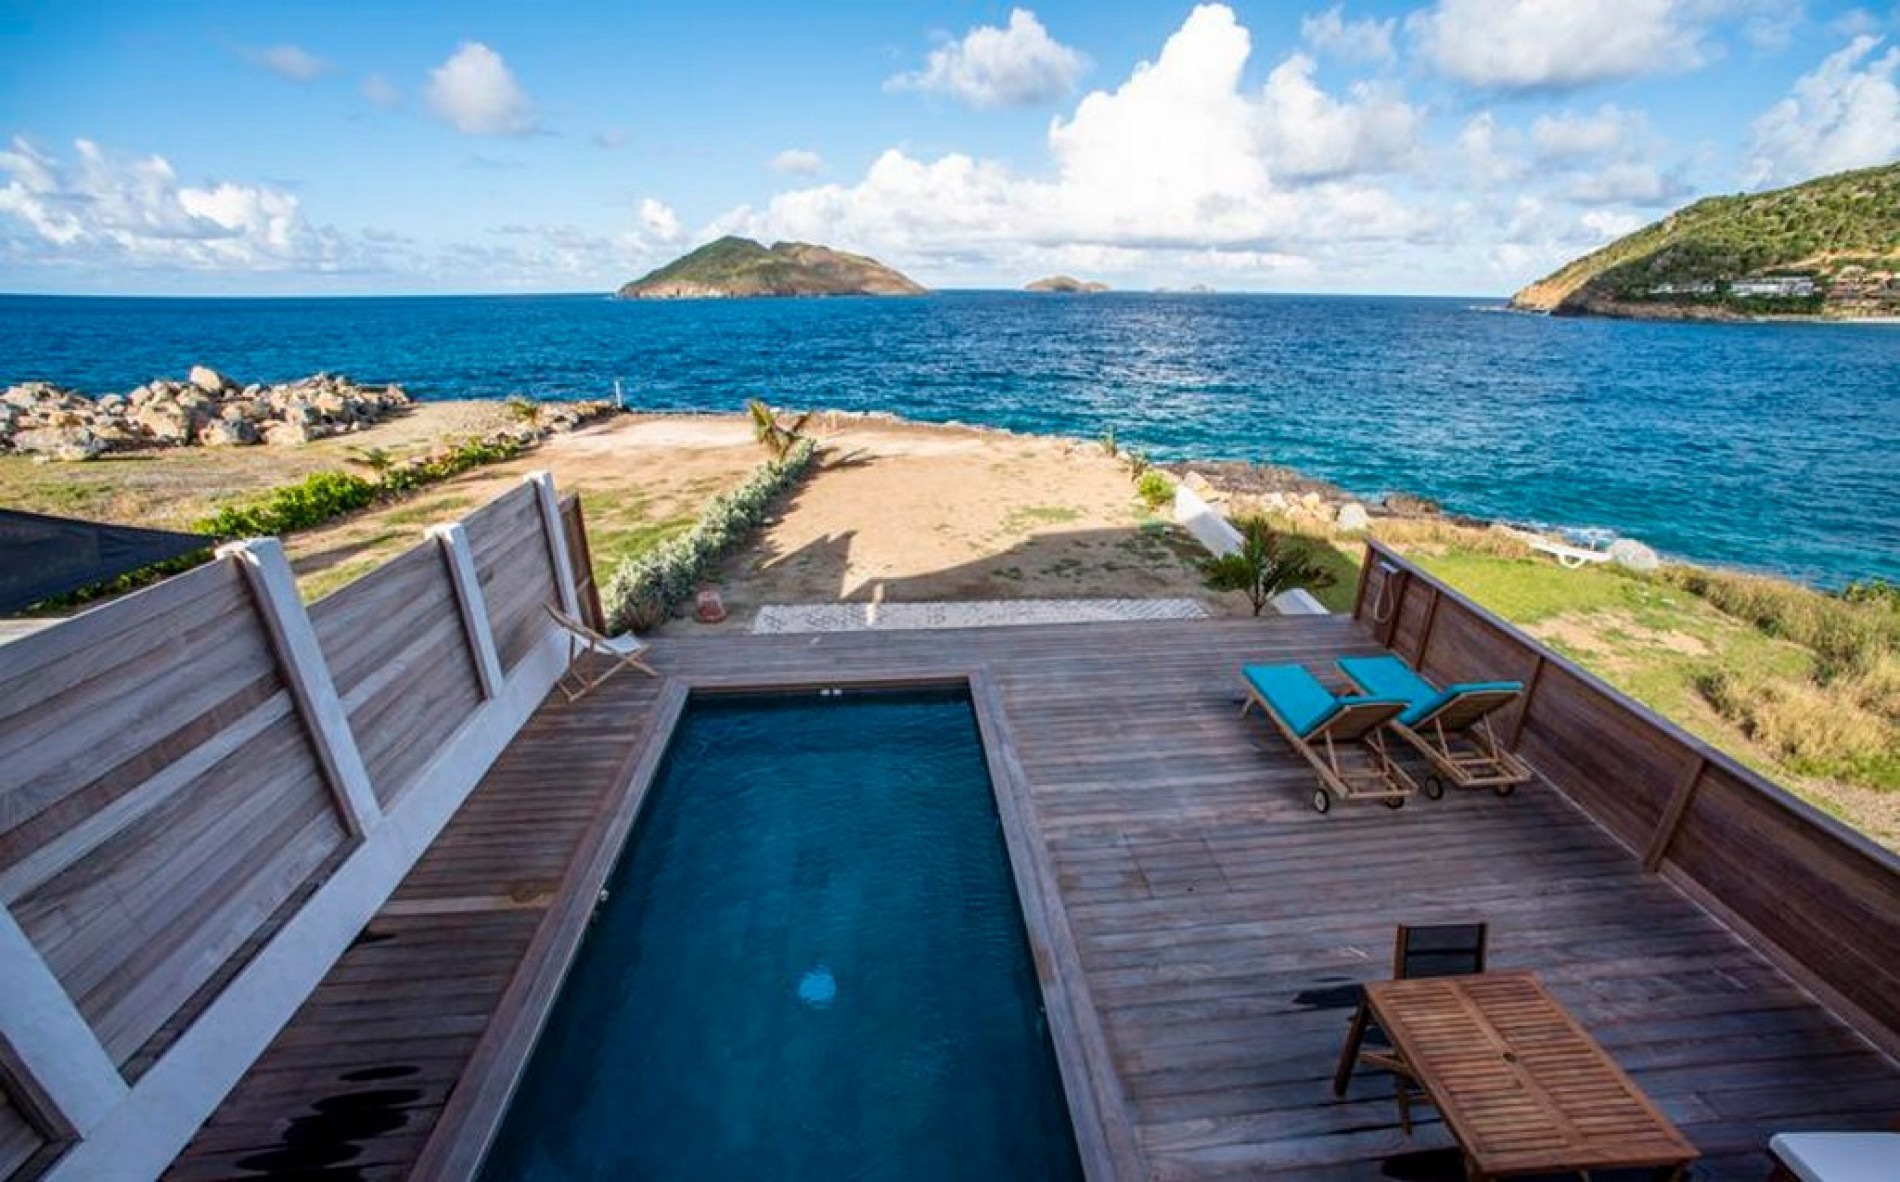 The most heavenly beach spa in St Barts